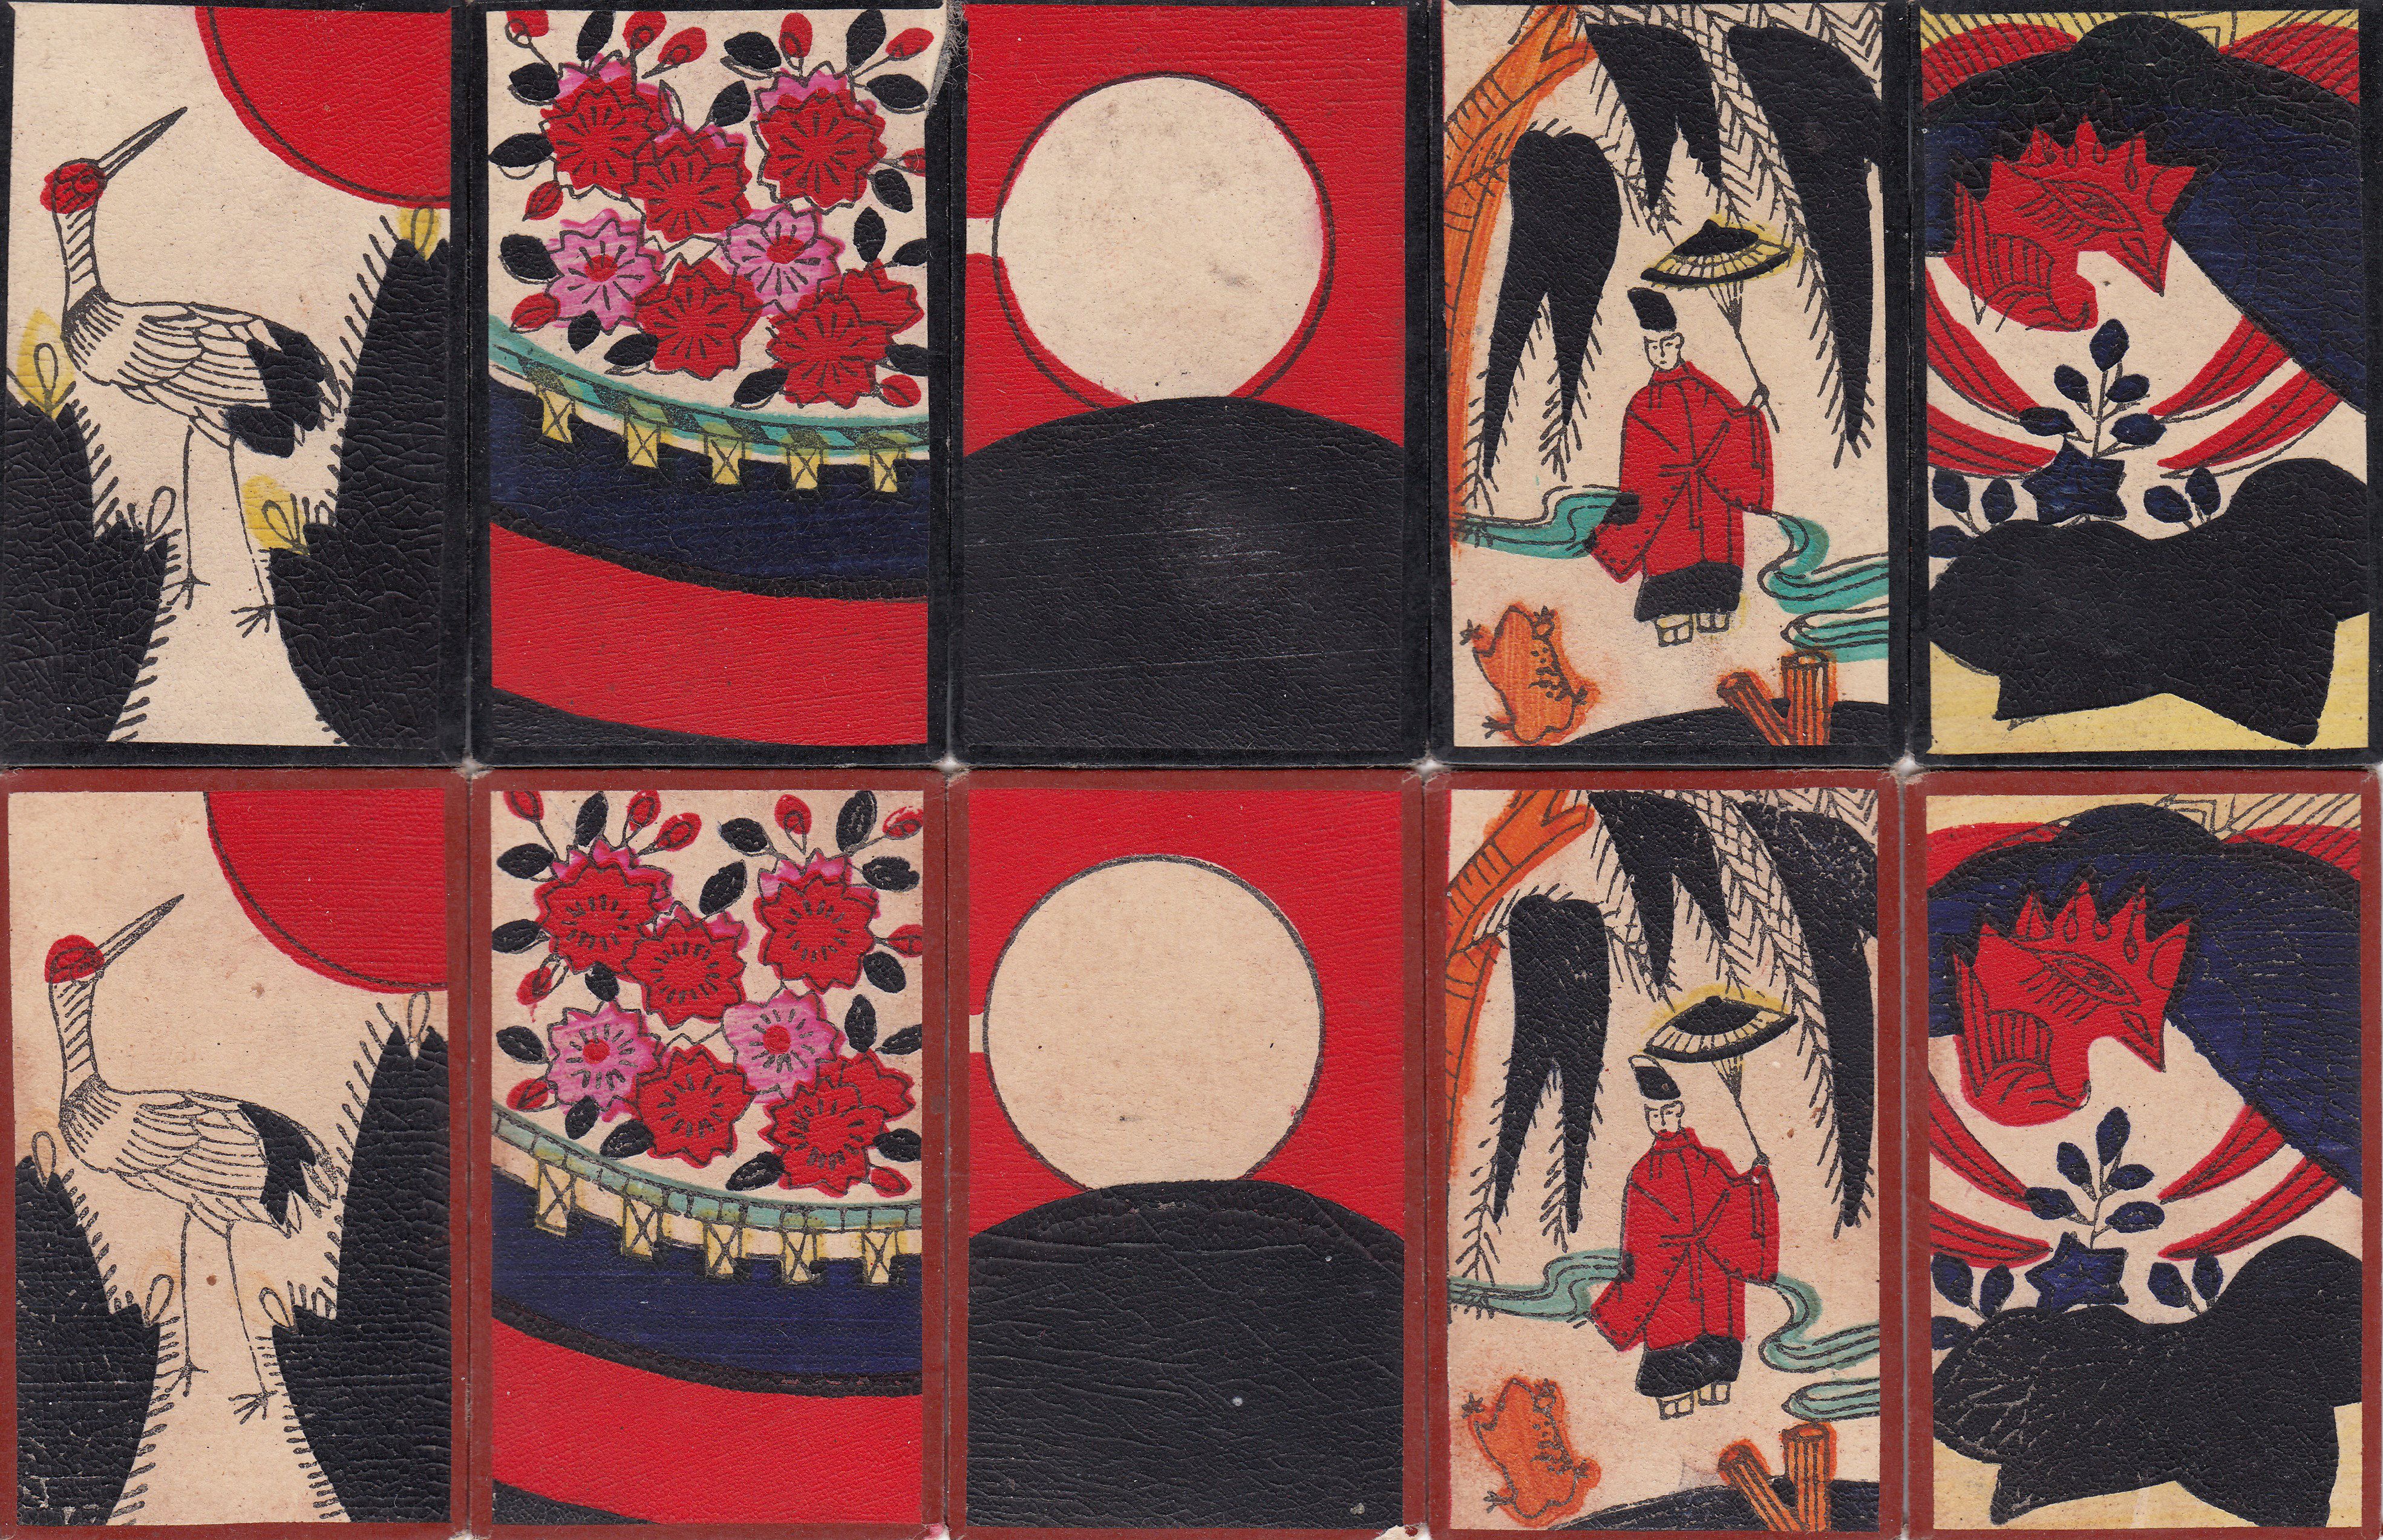 Two sets of Hanafuda cards with colours printed by hand, indicated by streaks in the inks.